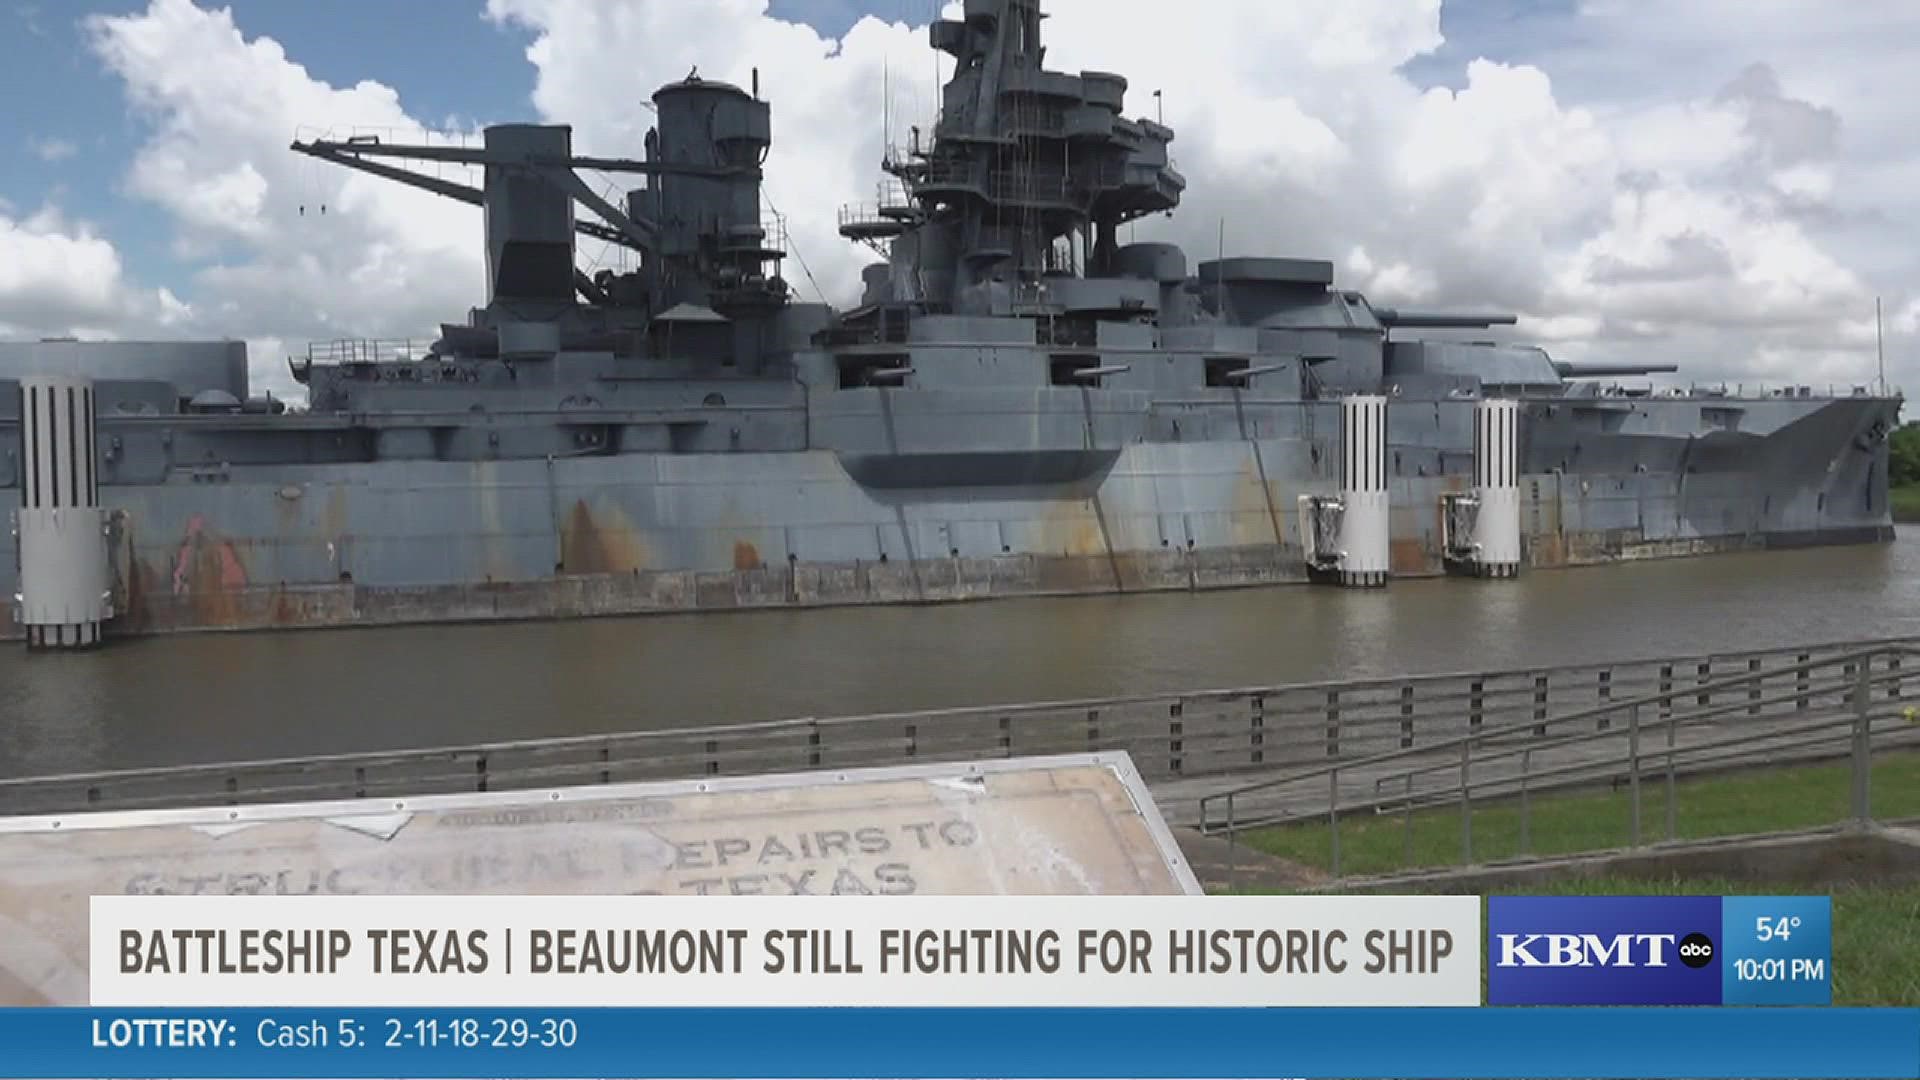 It looks like Beaumont’s still in the running to become the permanent home for the historic Battleship Texas.